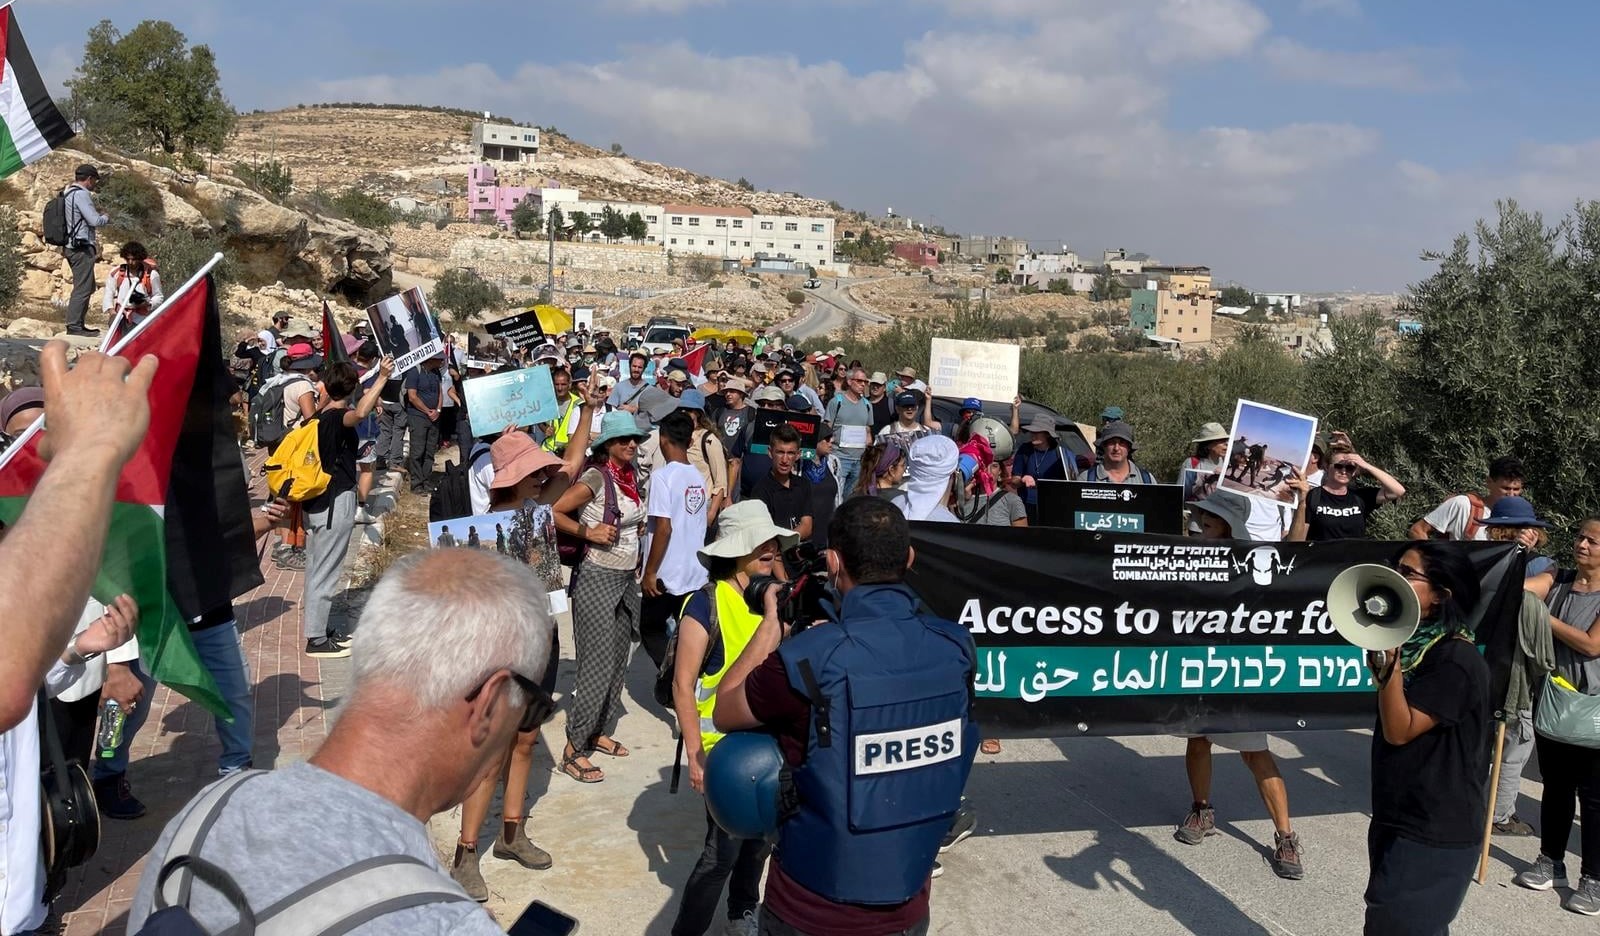 Israelis and Palestinians marched together in the occupied West Bank on Saturday, October 2, to demand access to adequate potable water for the villagers of Al-Mufqara.